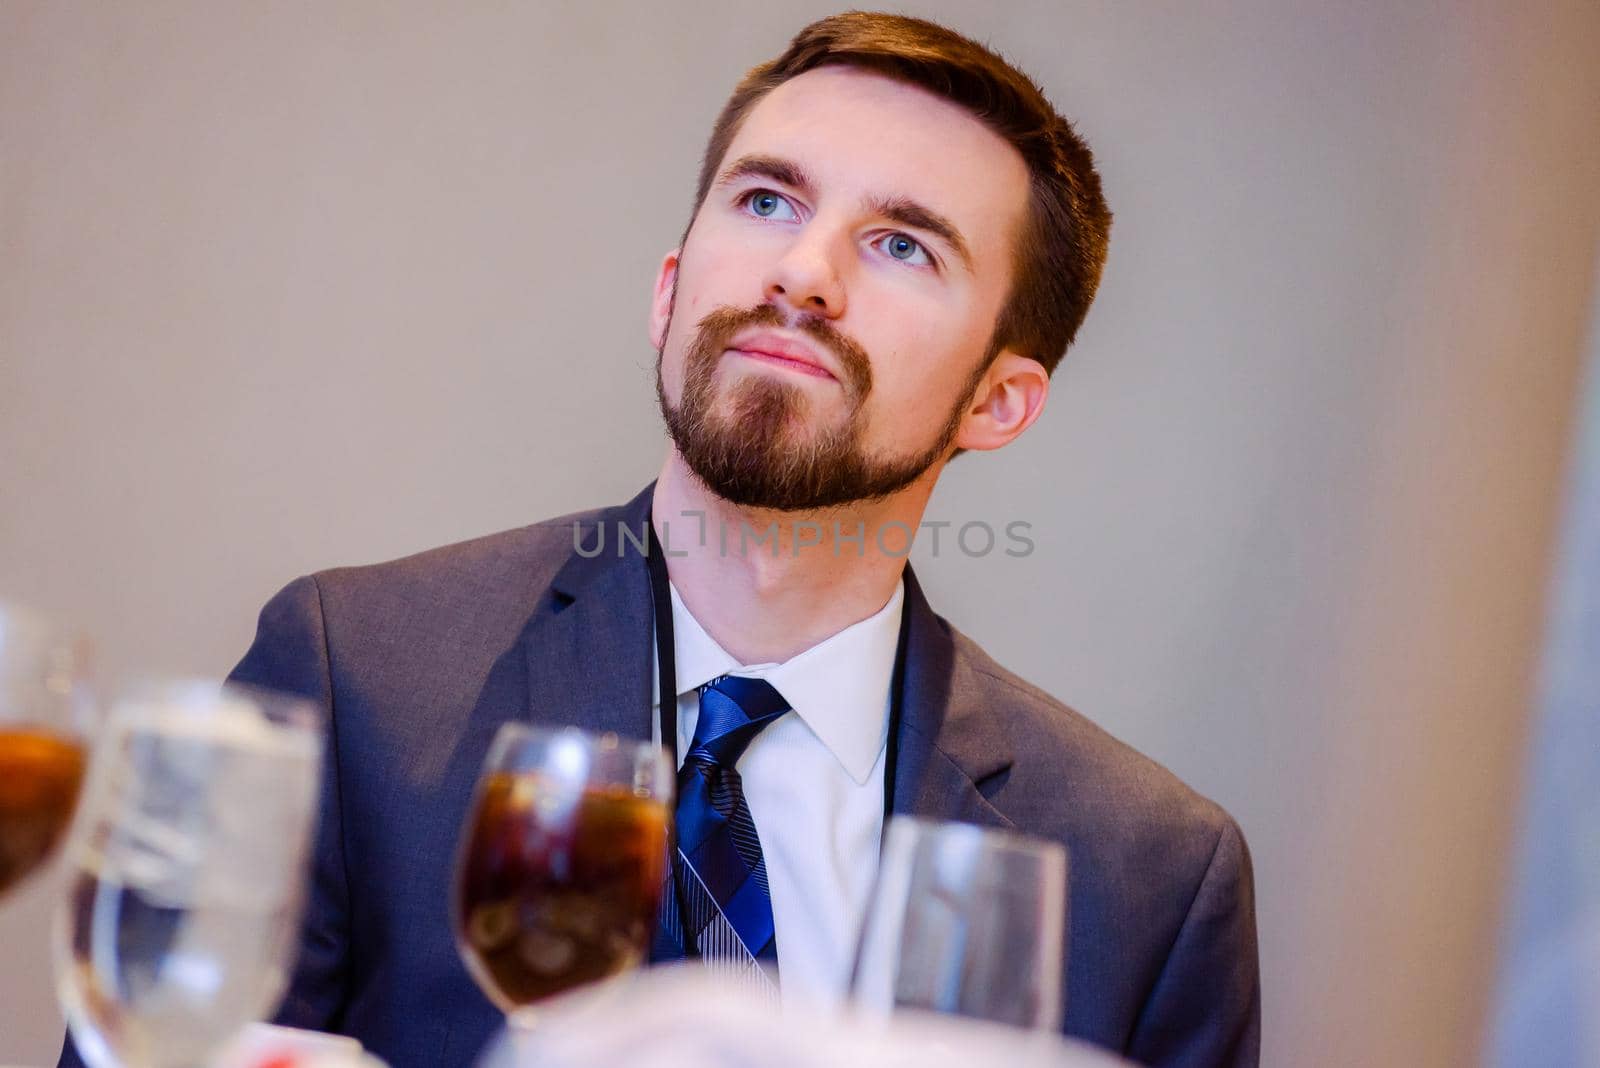 Handsome man with dark hair and goatee looking up at speaker at a conference while sitting at dining table